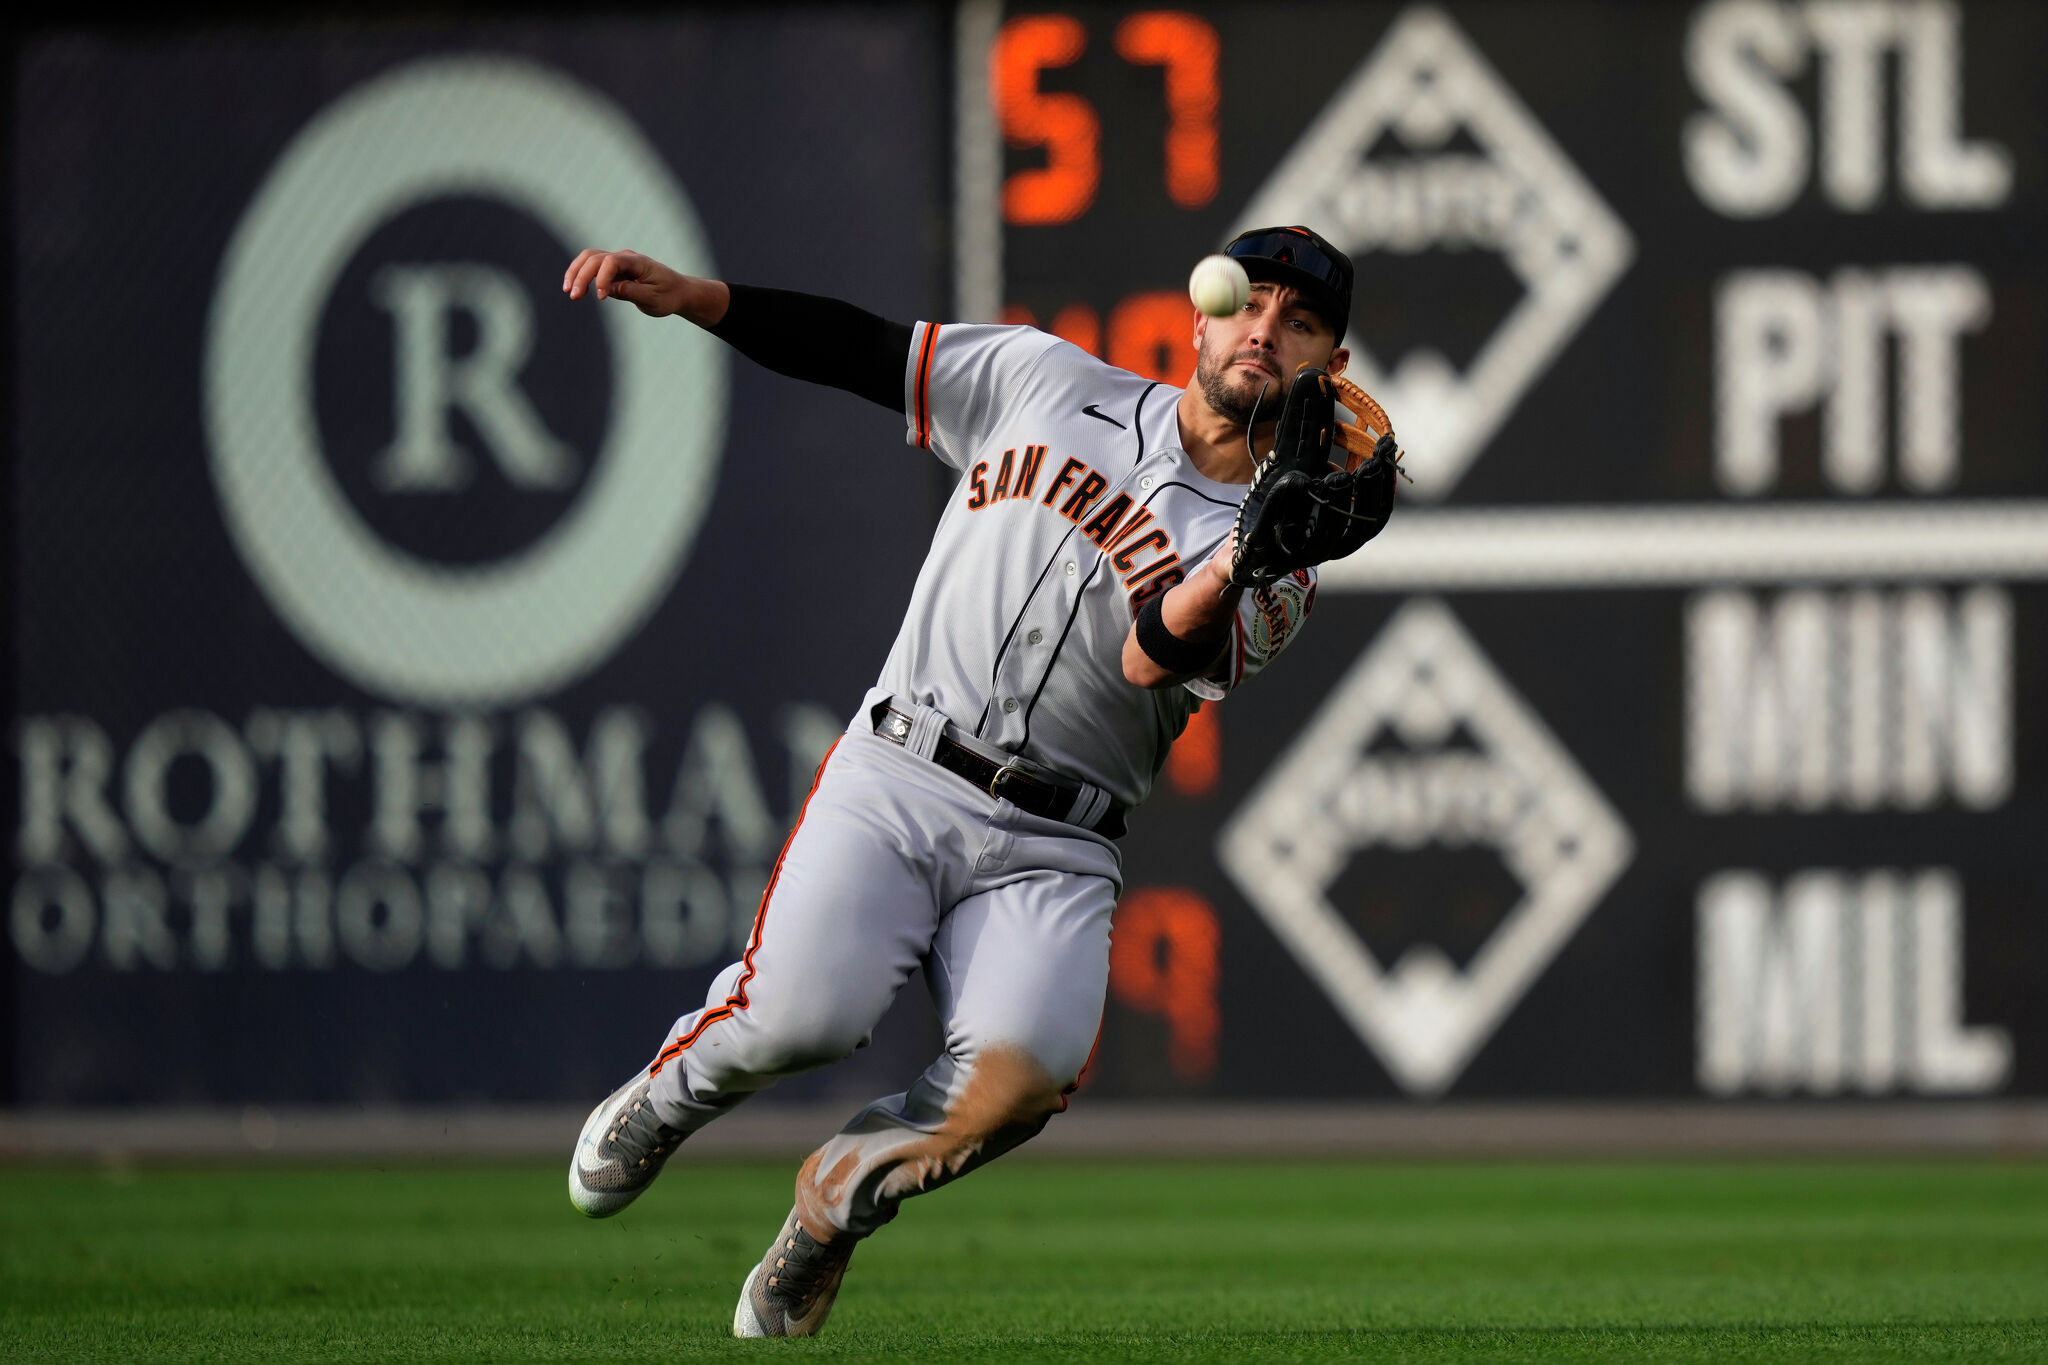 Giants place Conforto on injured list, plan to start Harrison vs. Reds